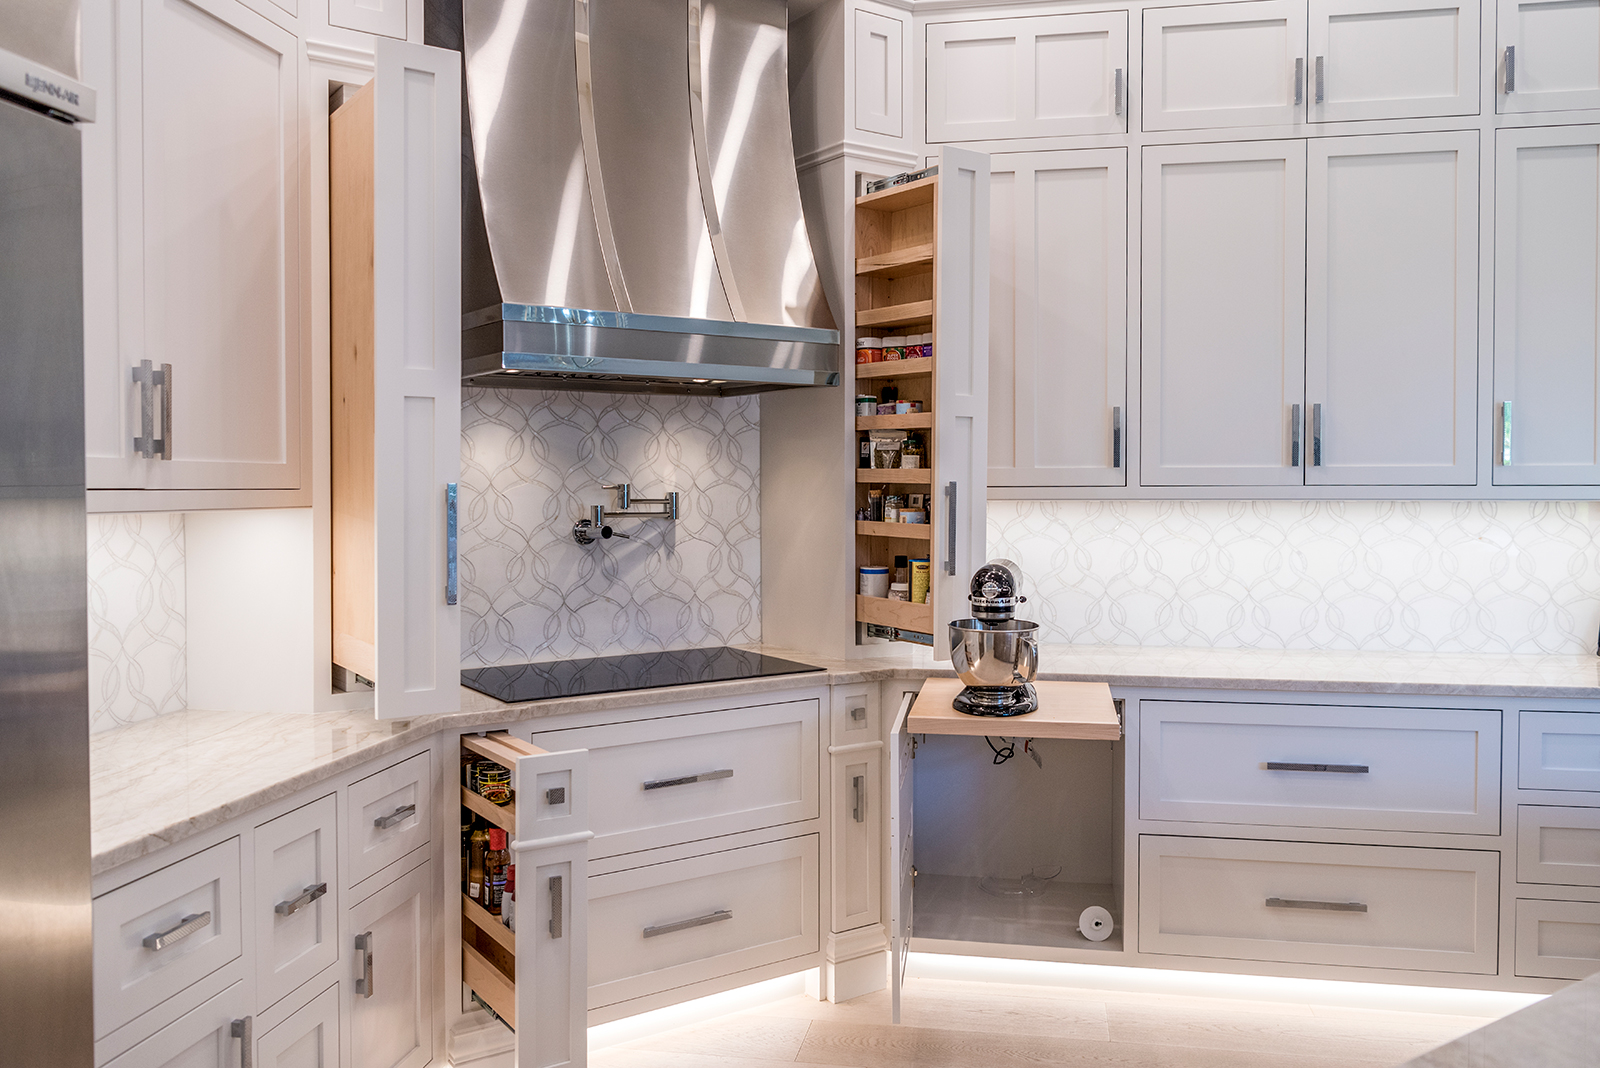 7 Benefits of Having a Well-Ordered Kitchen Pantry Storage